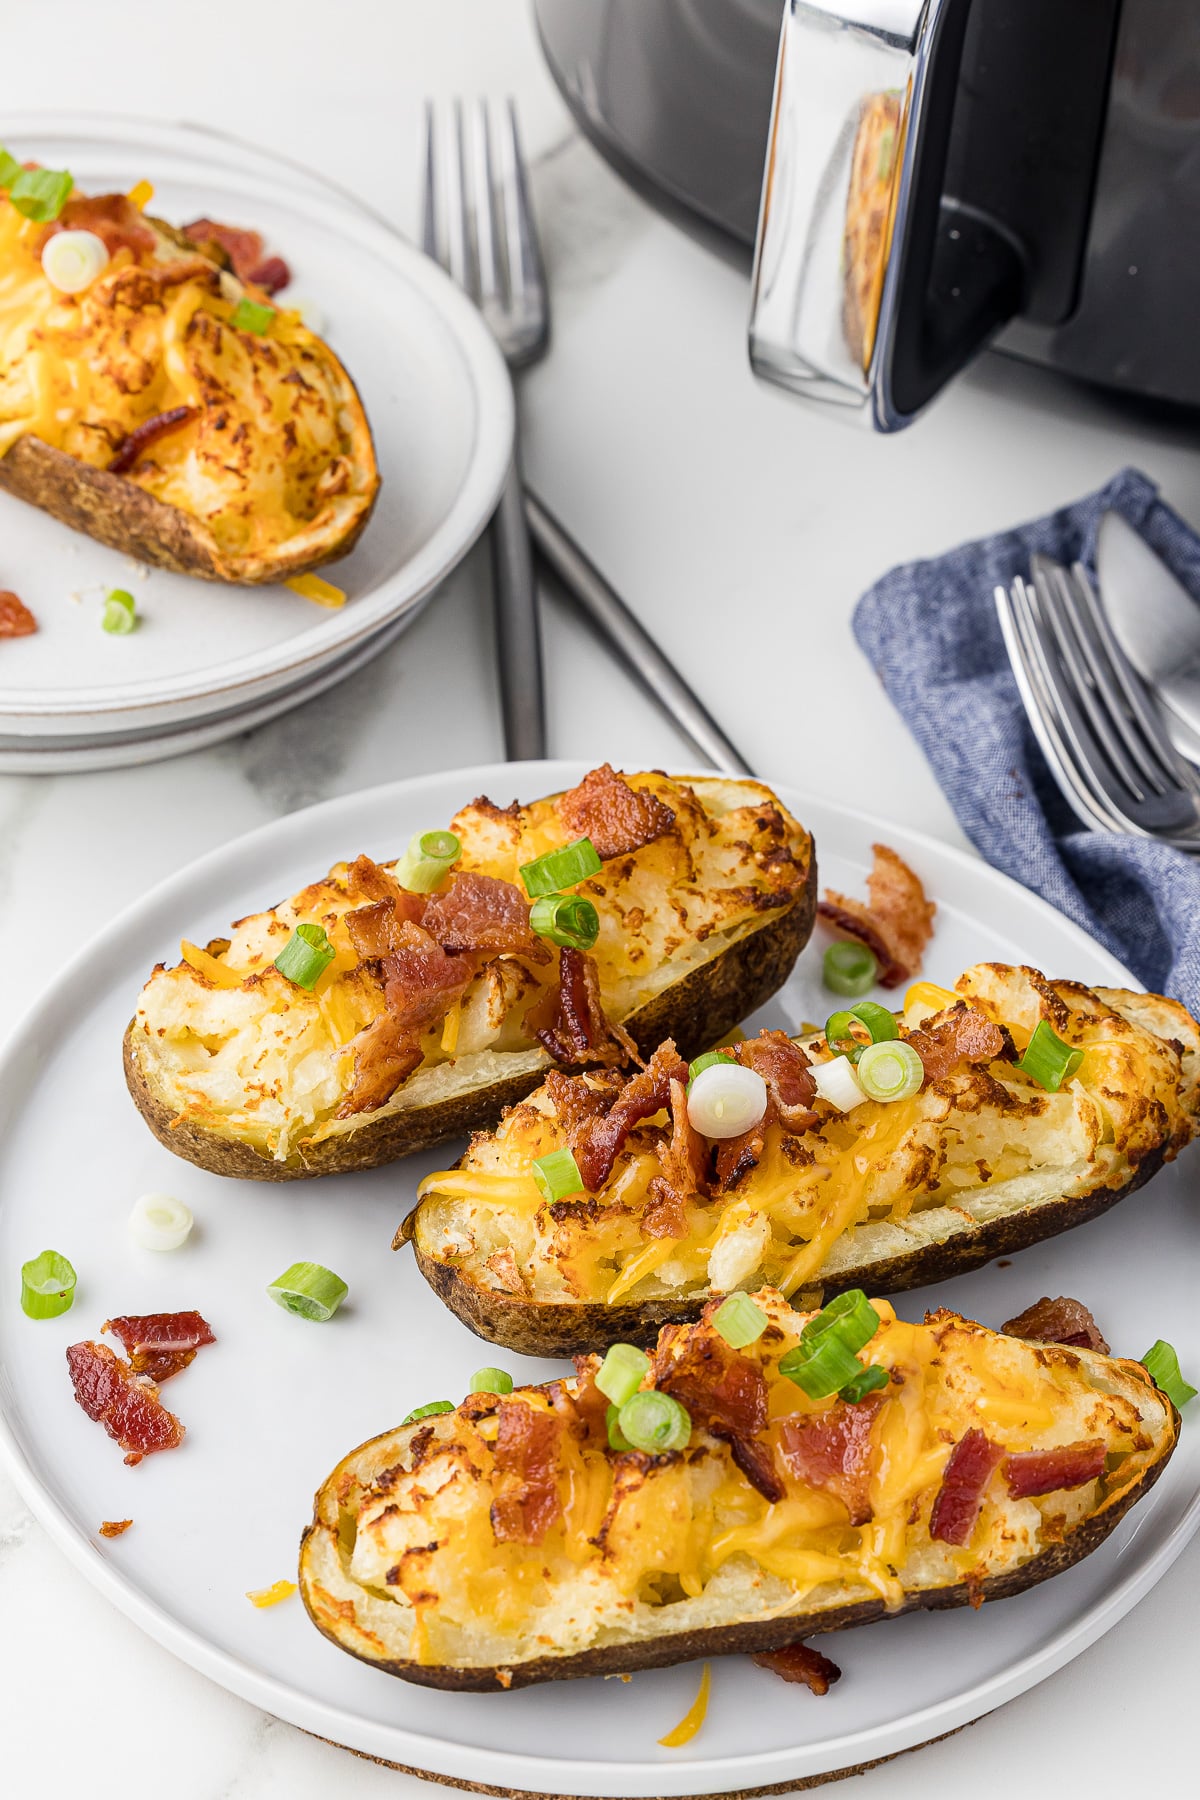 Three baked potatoes on a serving plate on a white countertop with an air fryer and forks and knives in the background